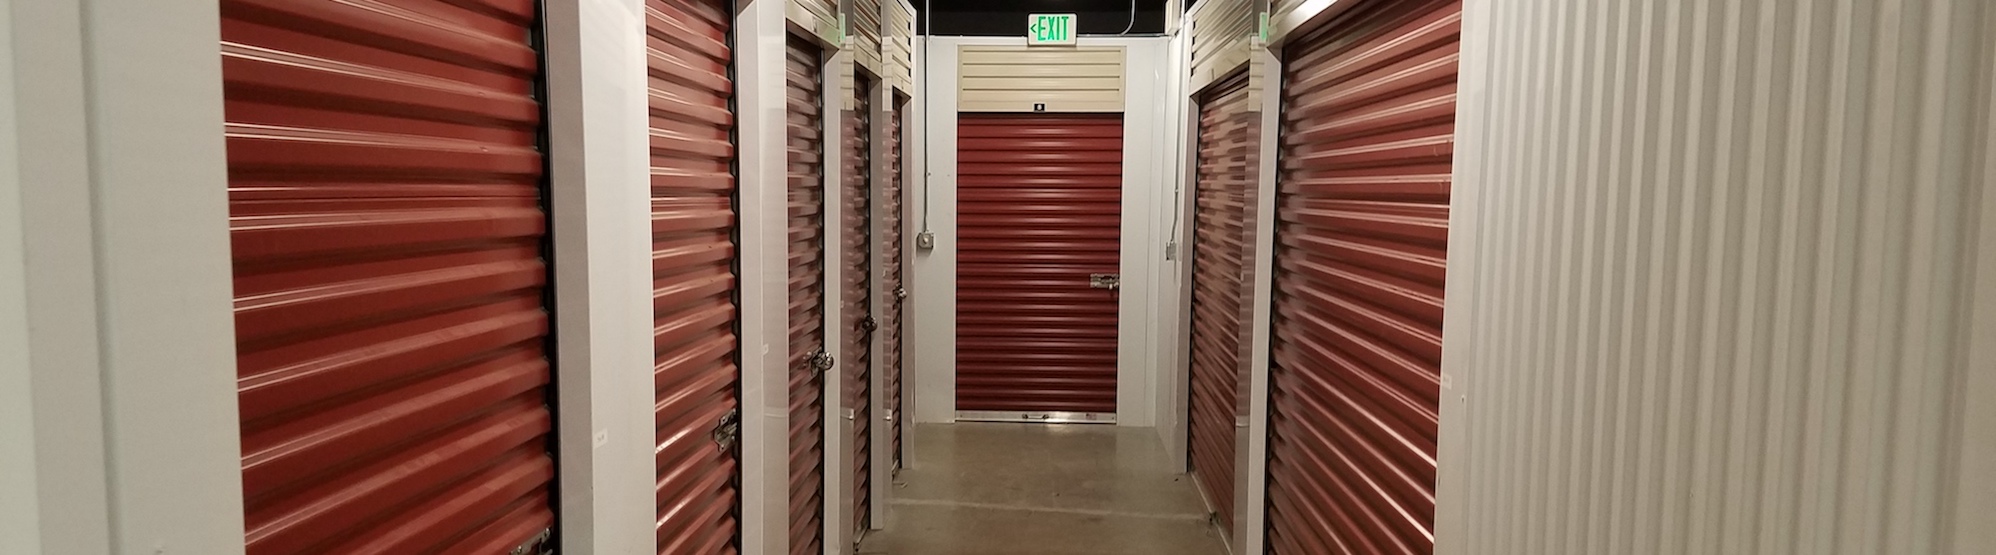 All Seasons Climate Controlled Self Storage